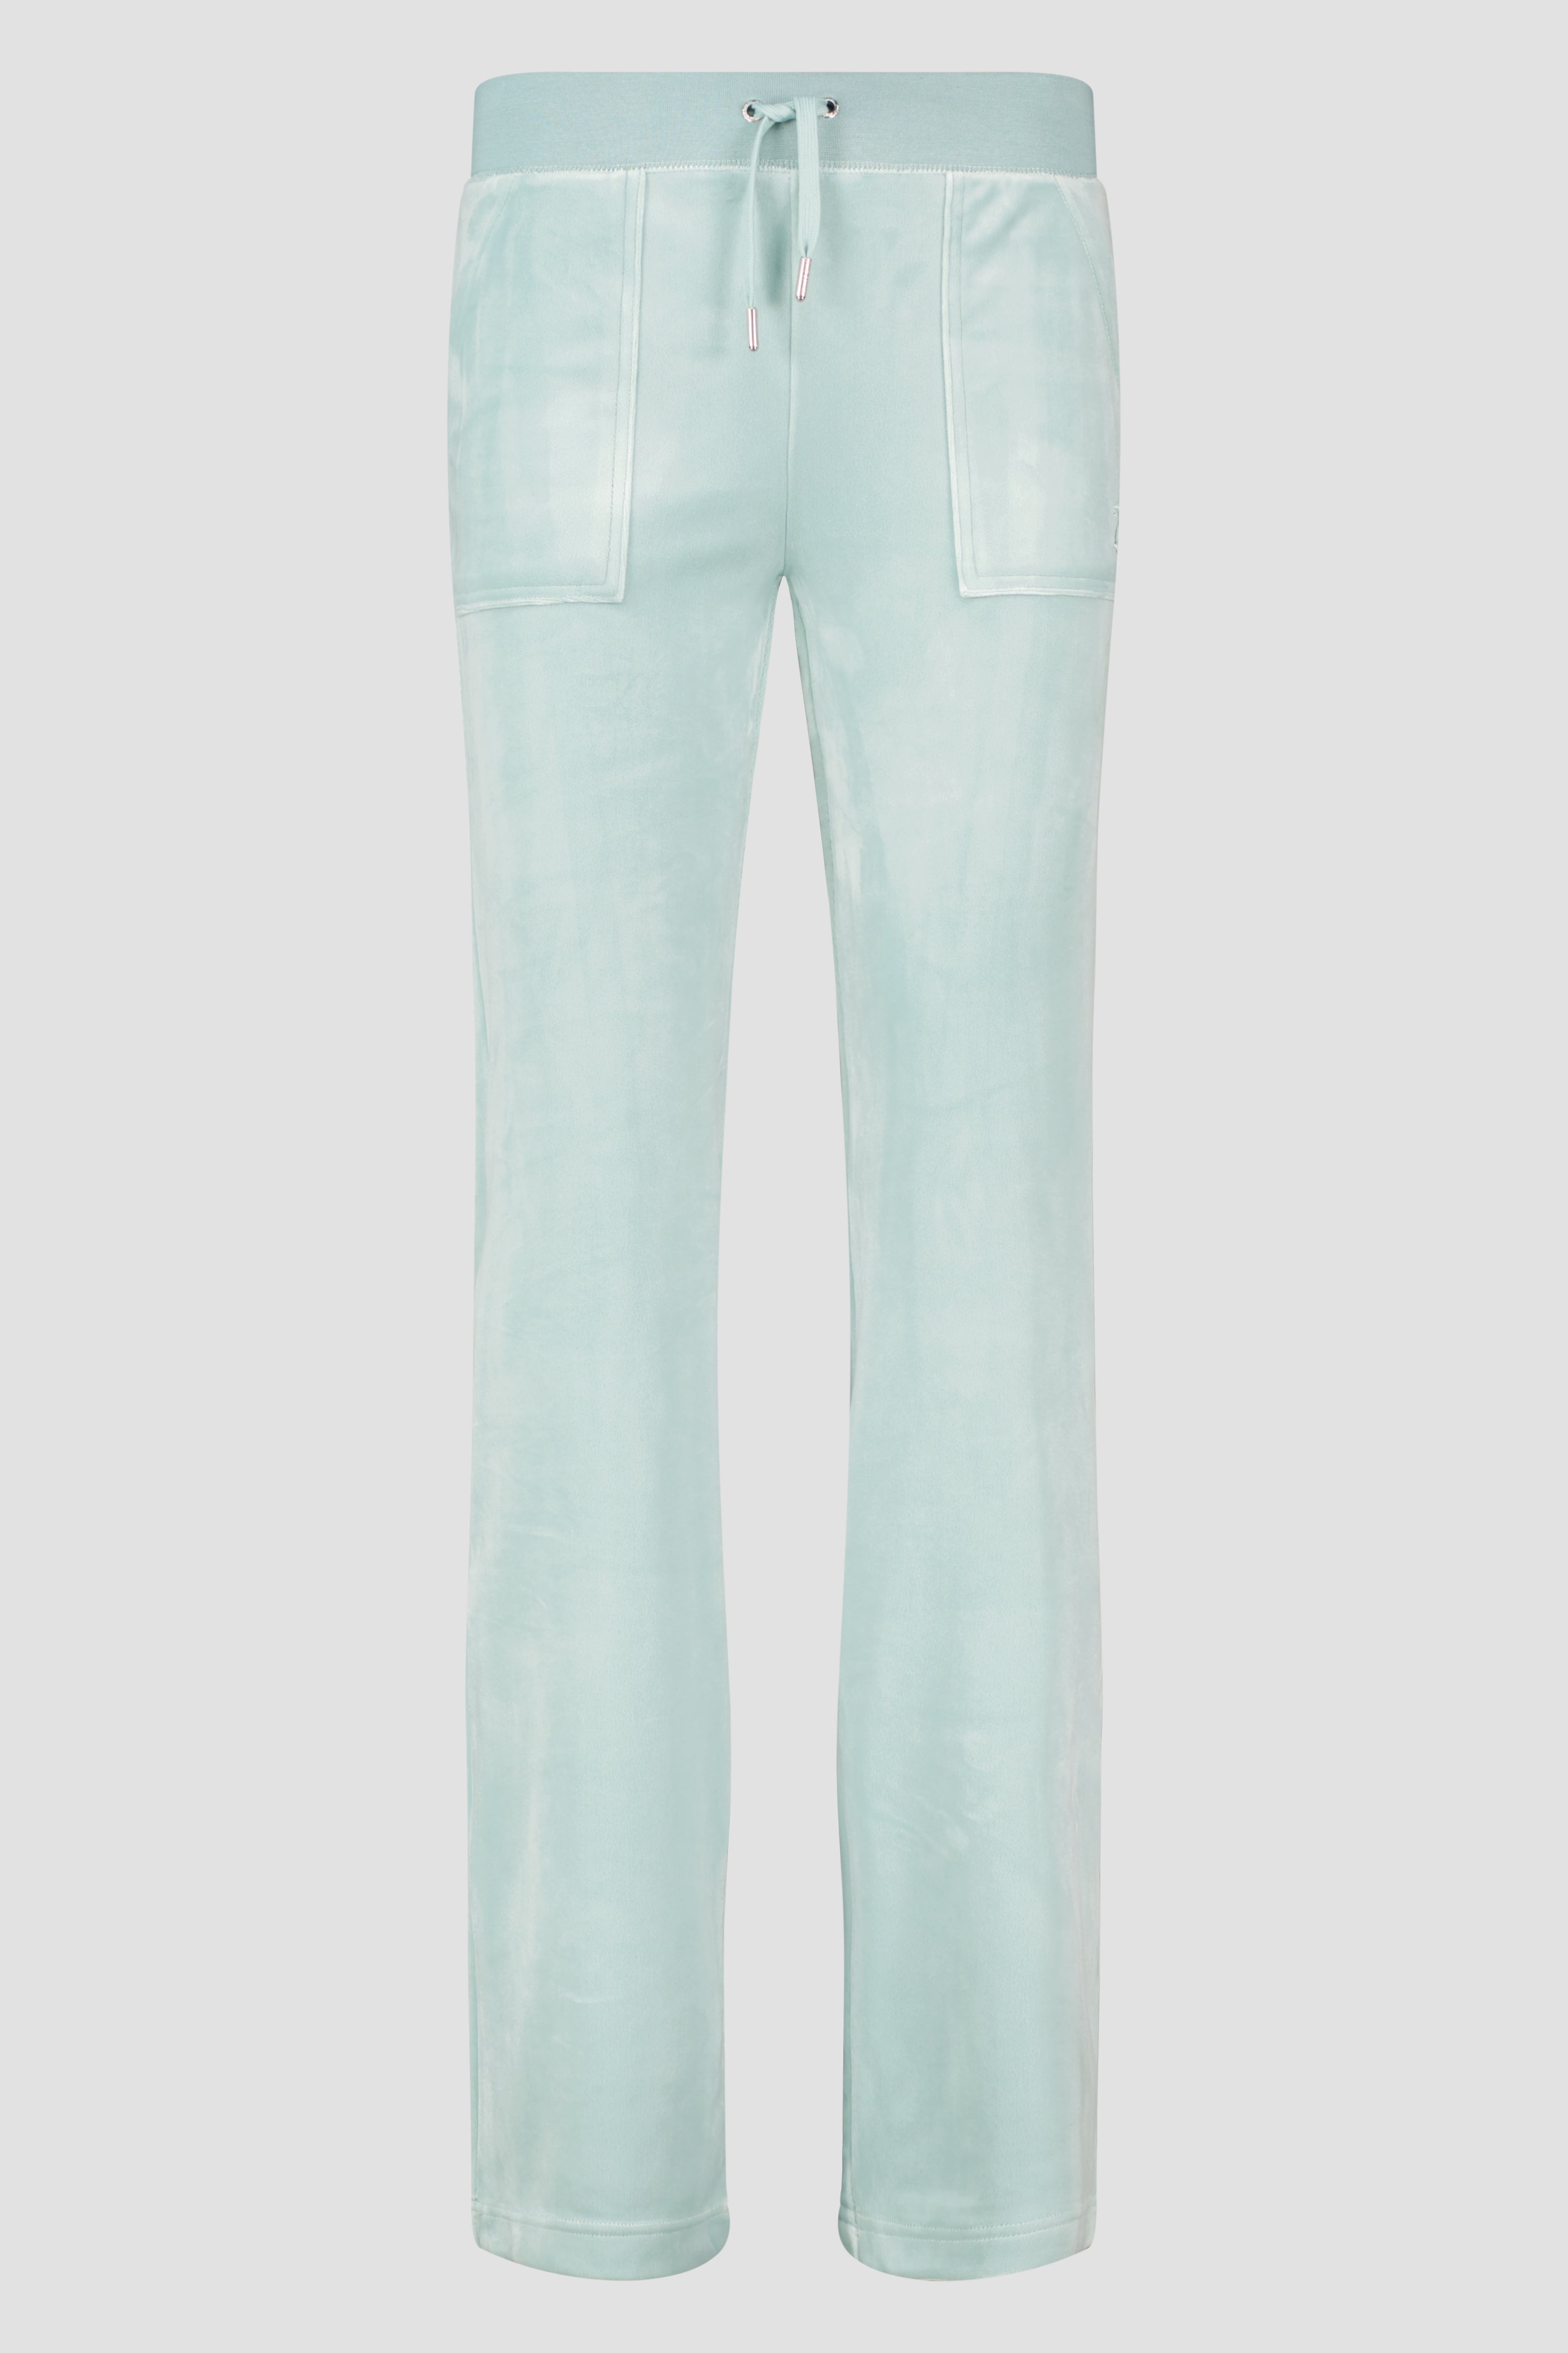 Women's Juicy Couture Del Ray Blue Surf Track Pants